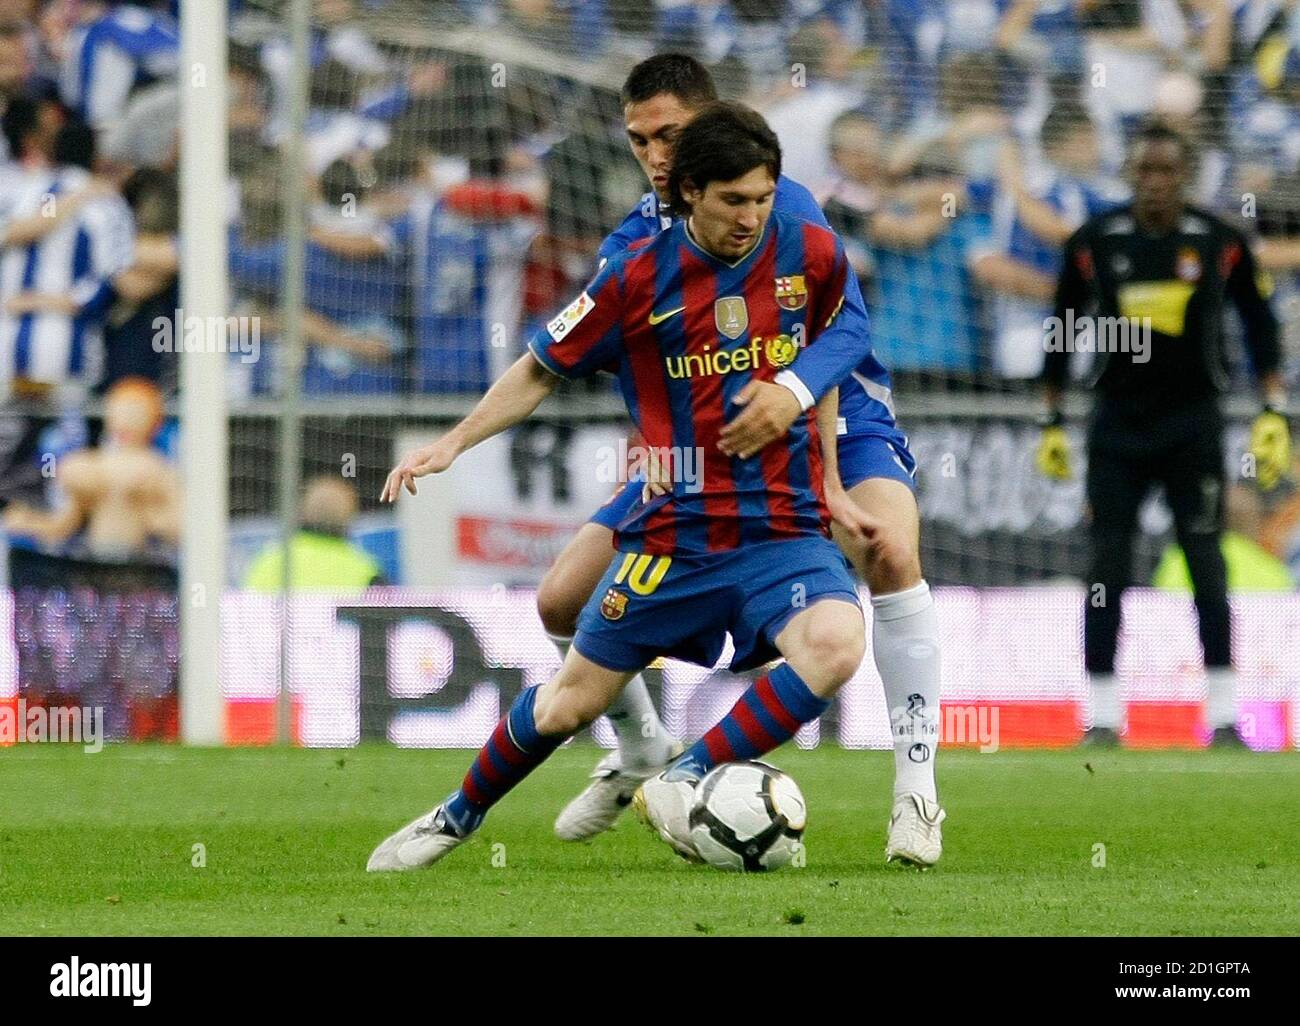 Barcelona's Lionel Messi (front) is challenged by RCD Espanyol's Victor Ruiz  during their Spanish first division soccer match at Cornella Prat stadium  in Barcelona April 17, 2010. REUTERS/Gustau Nacarino (SPAIN - Tags: